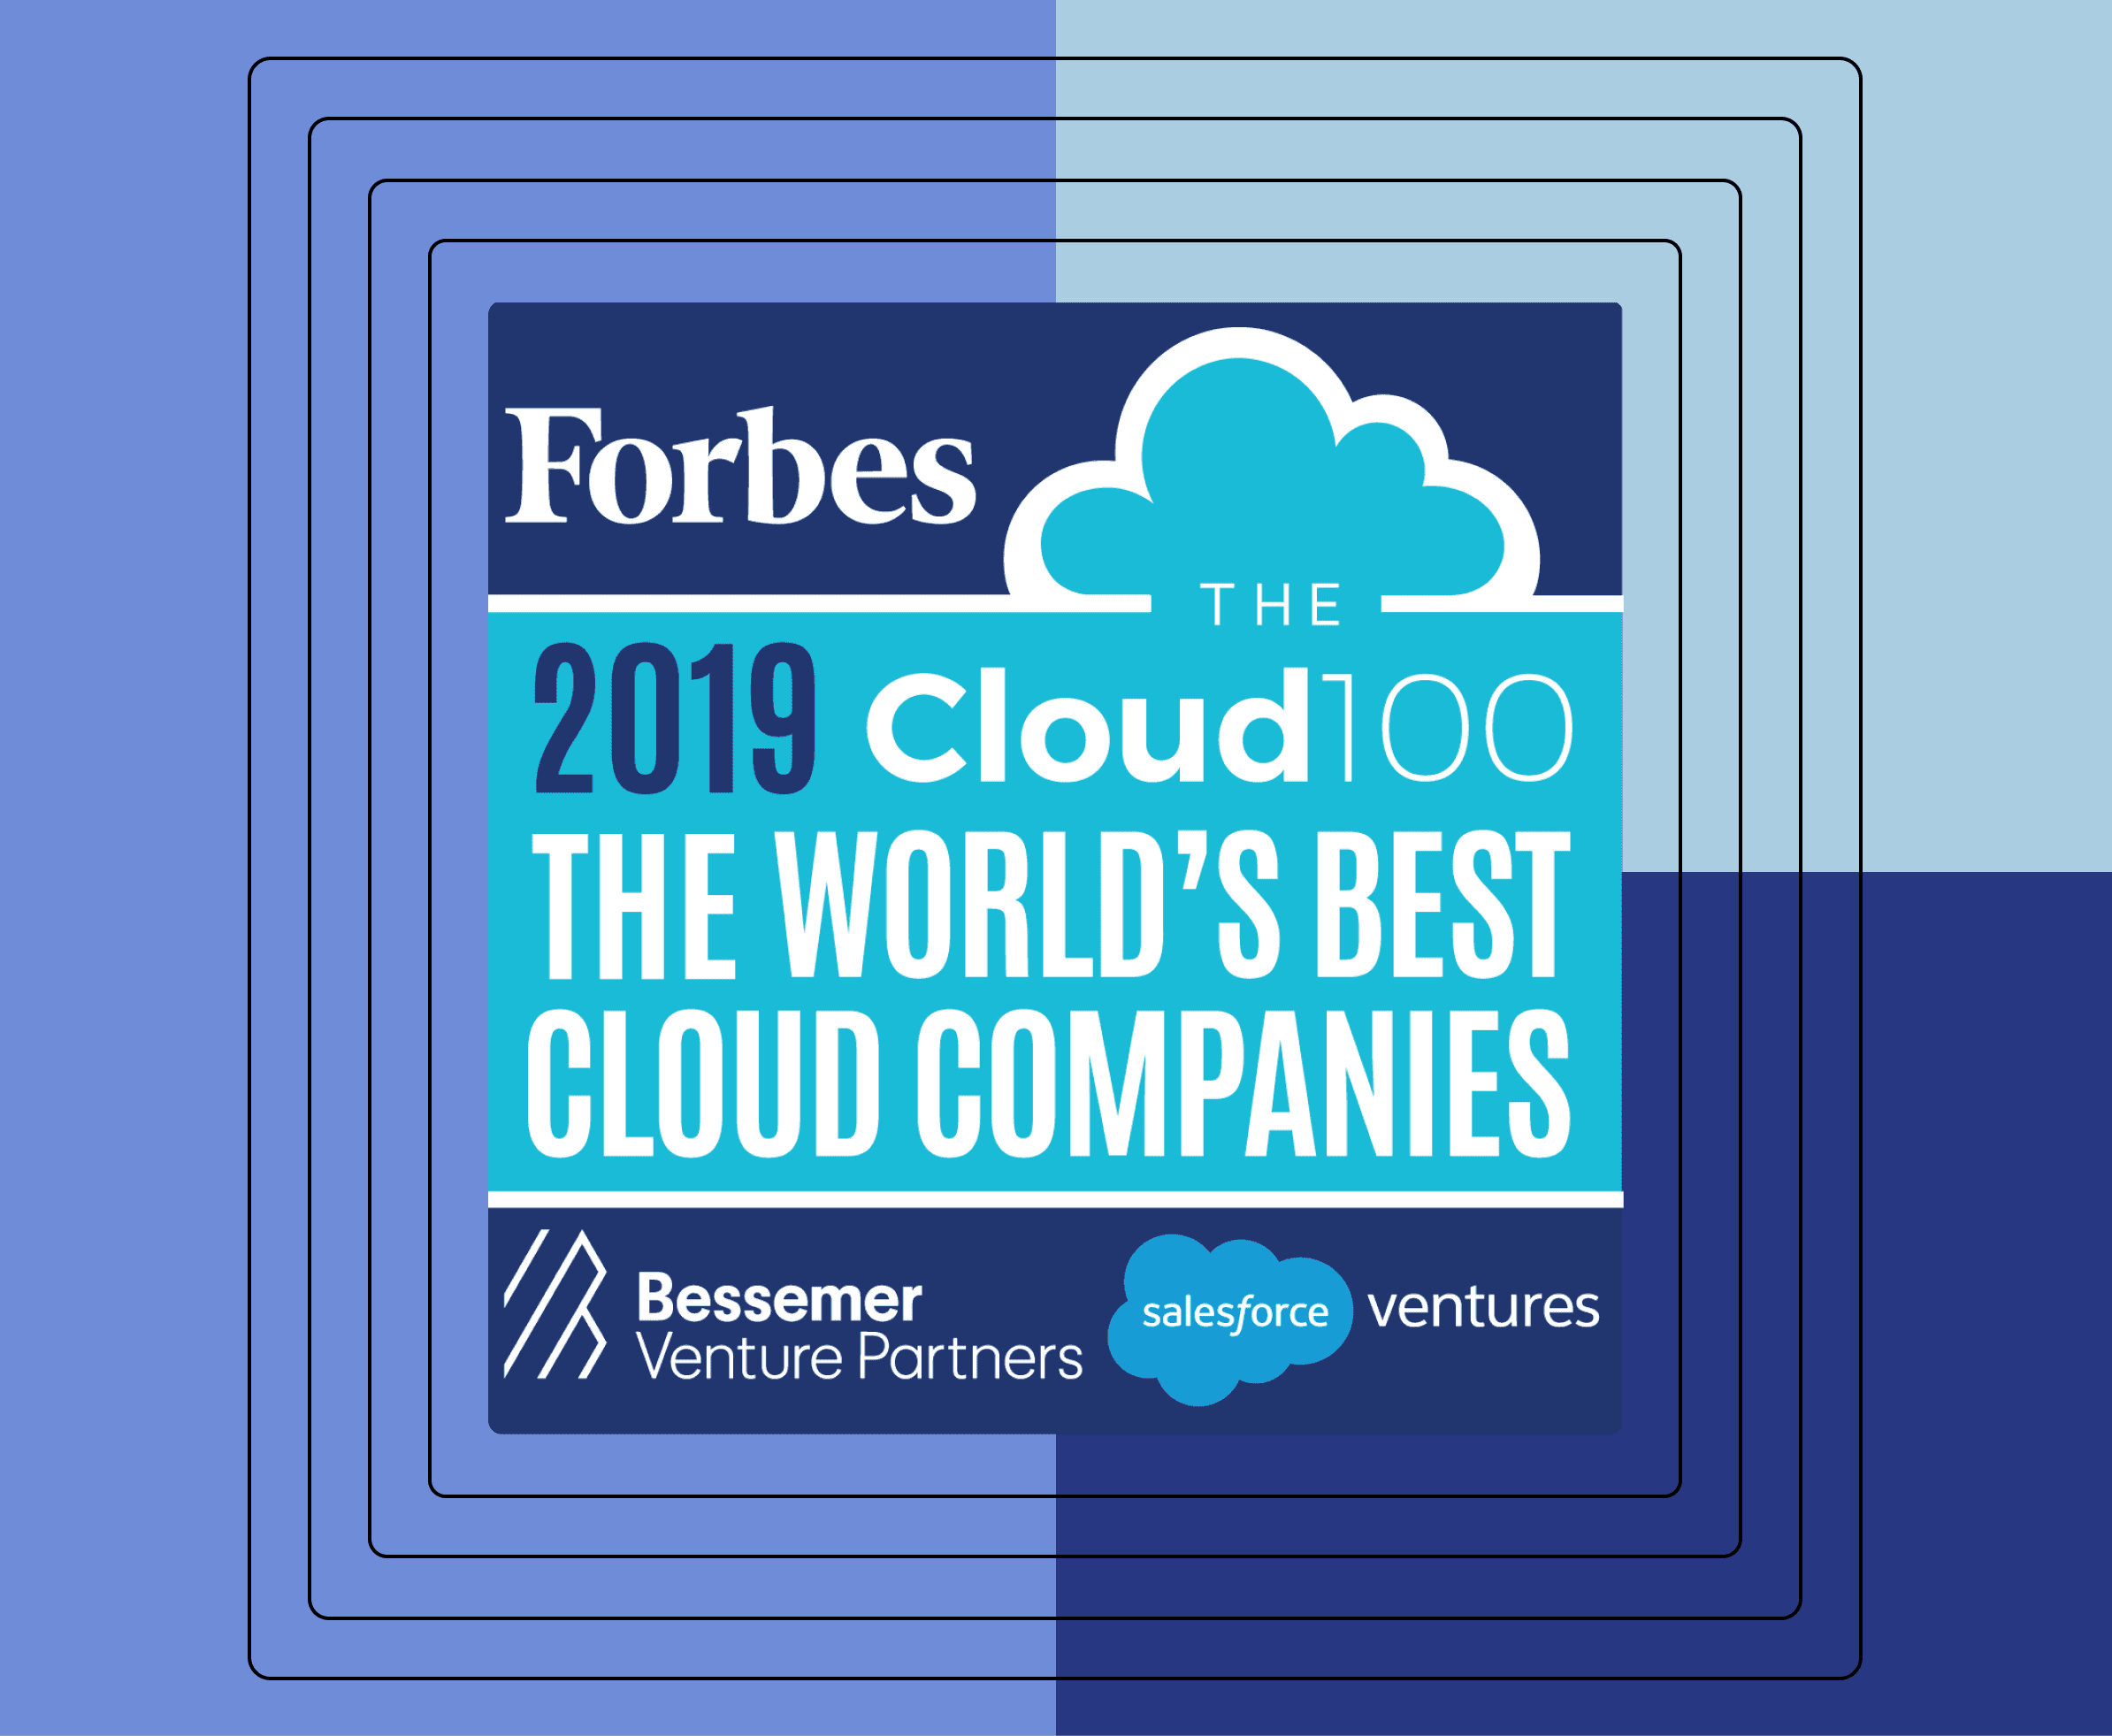 Alloy named forbes cloud 100